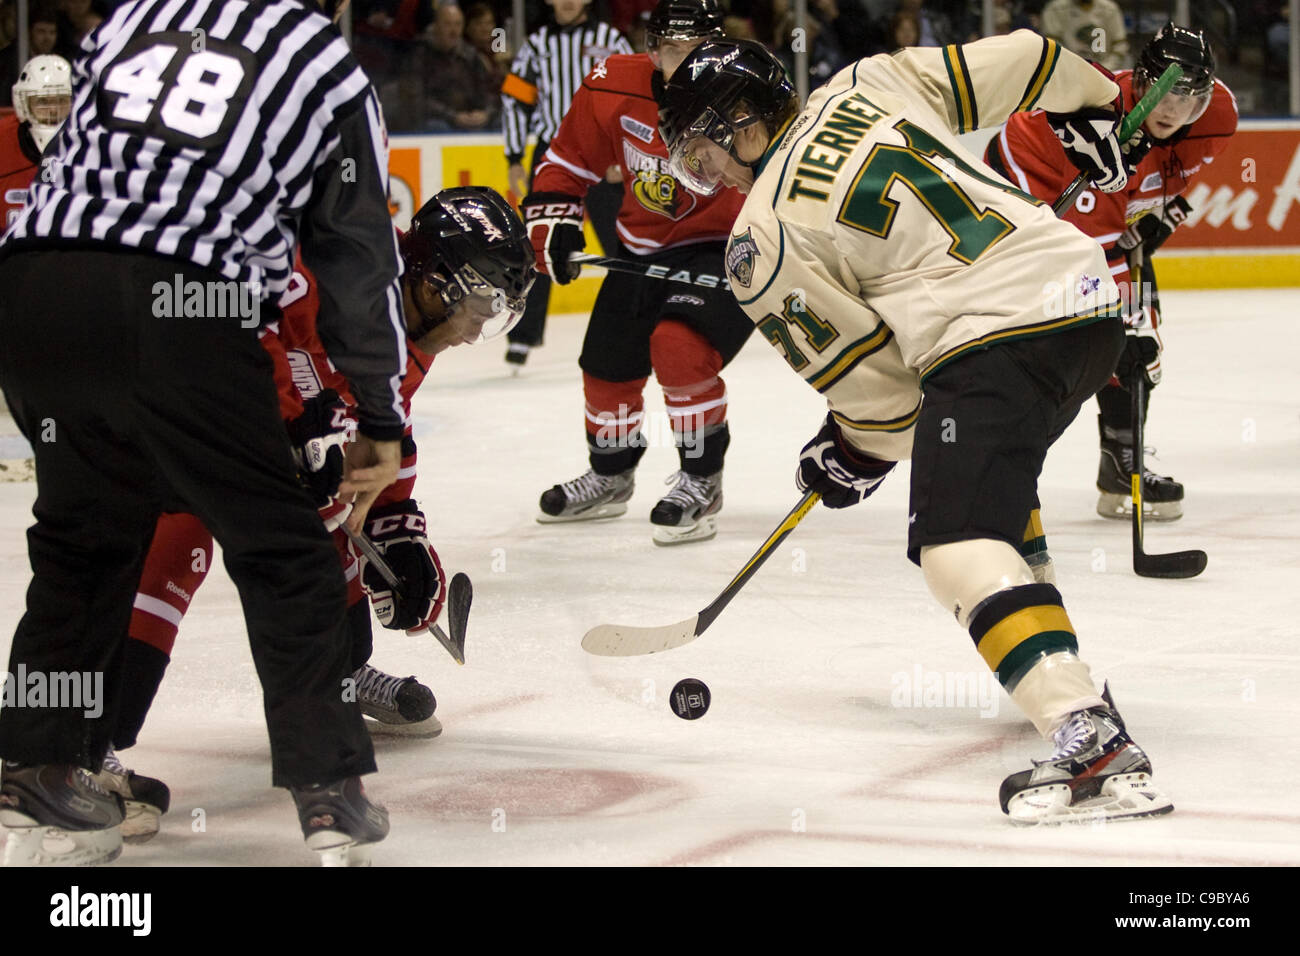 OHL 20 In 20 Season Preview: London Knights 